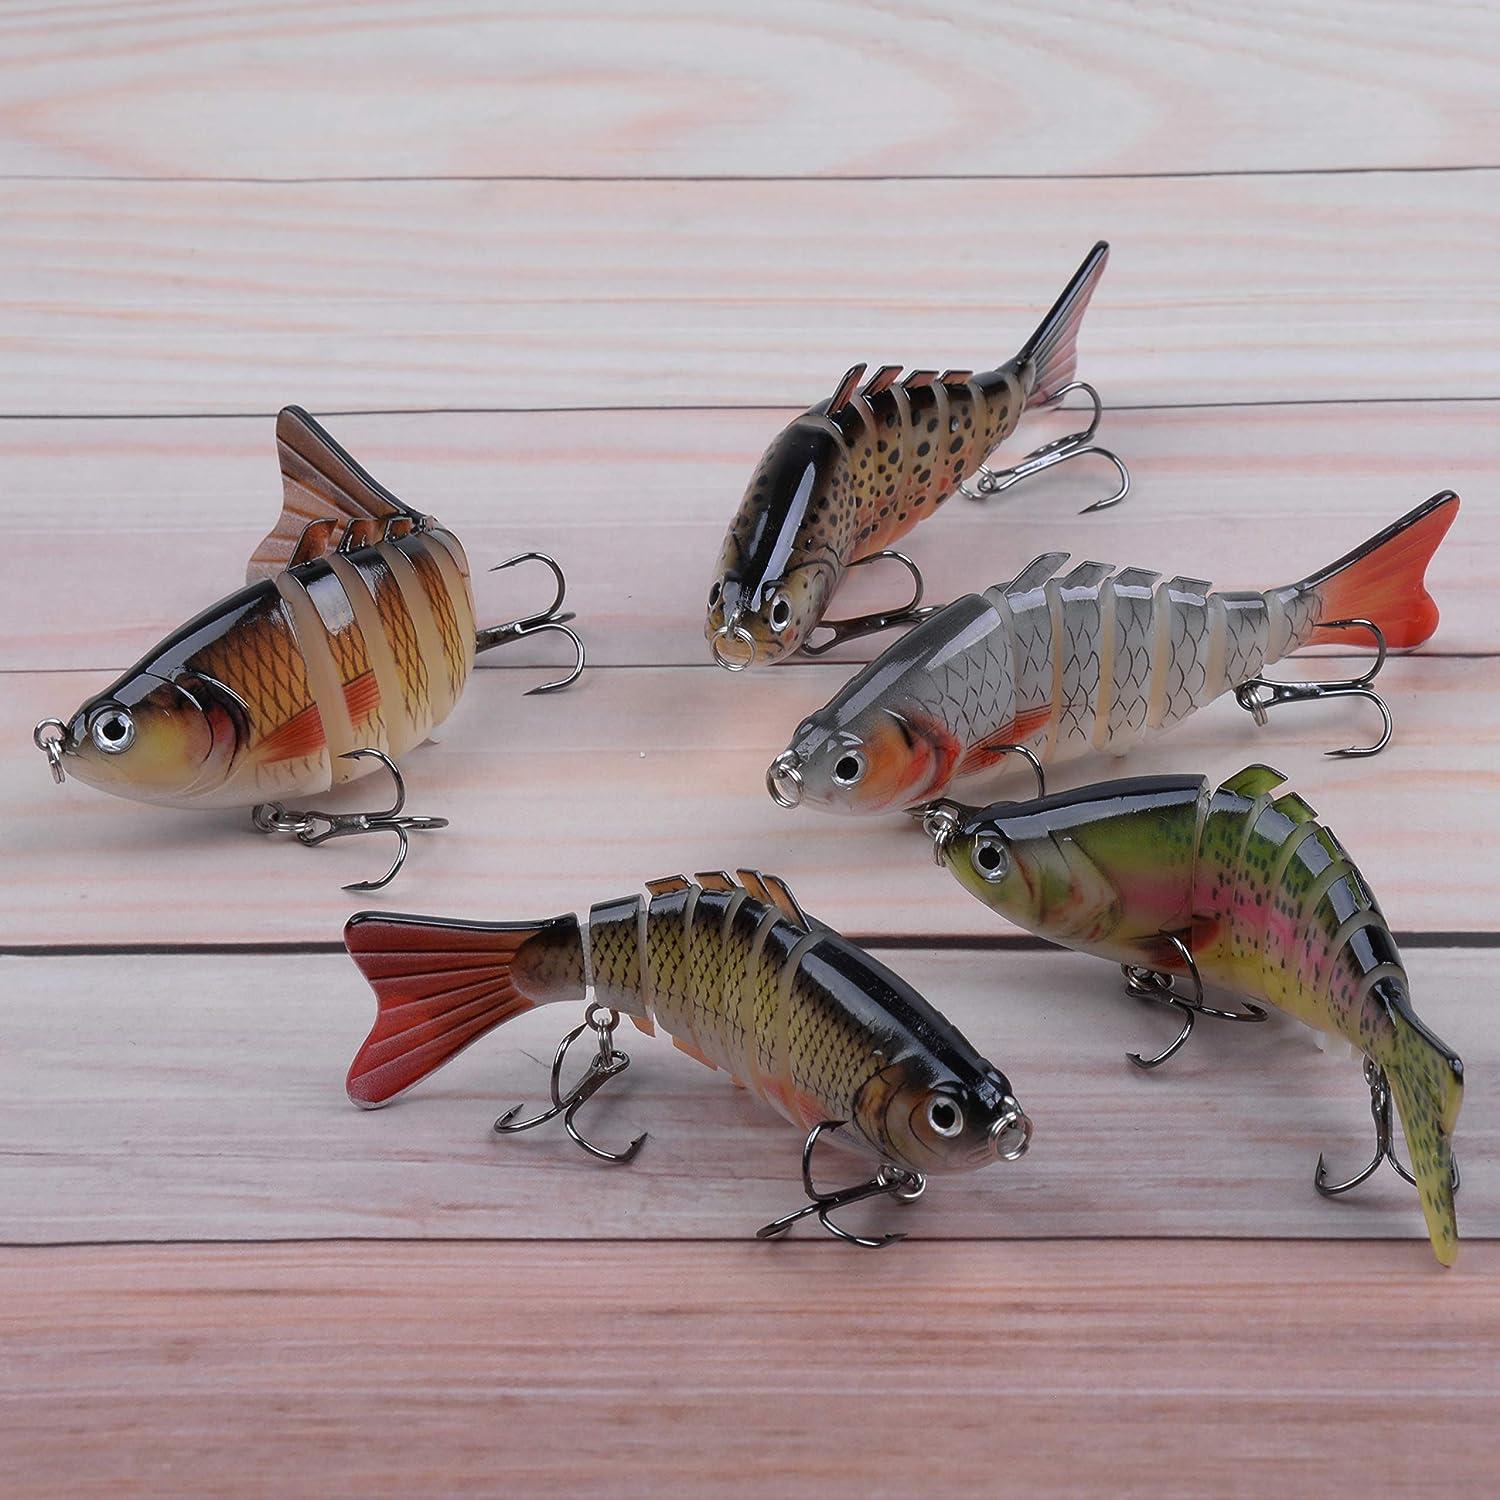 Fishing Lures for Bass Trout, 5pcs Segmented Multi Jointed